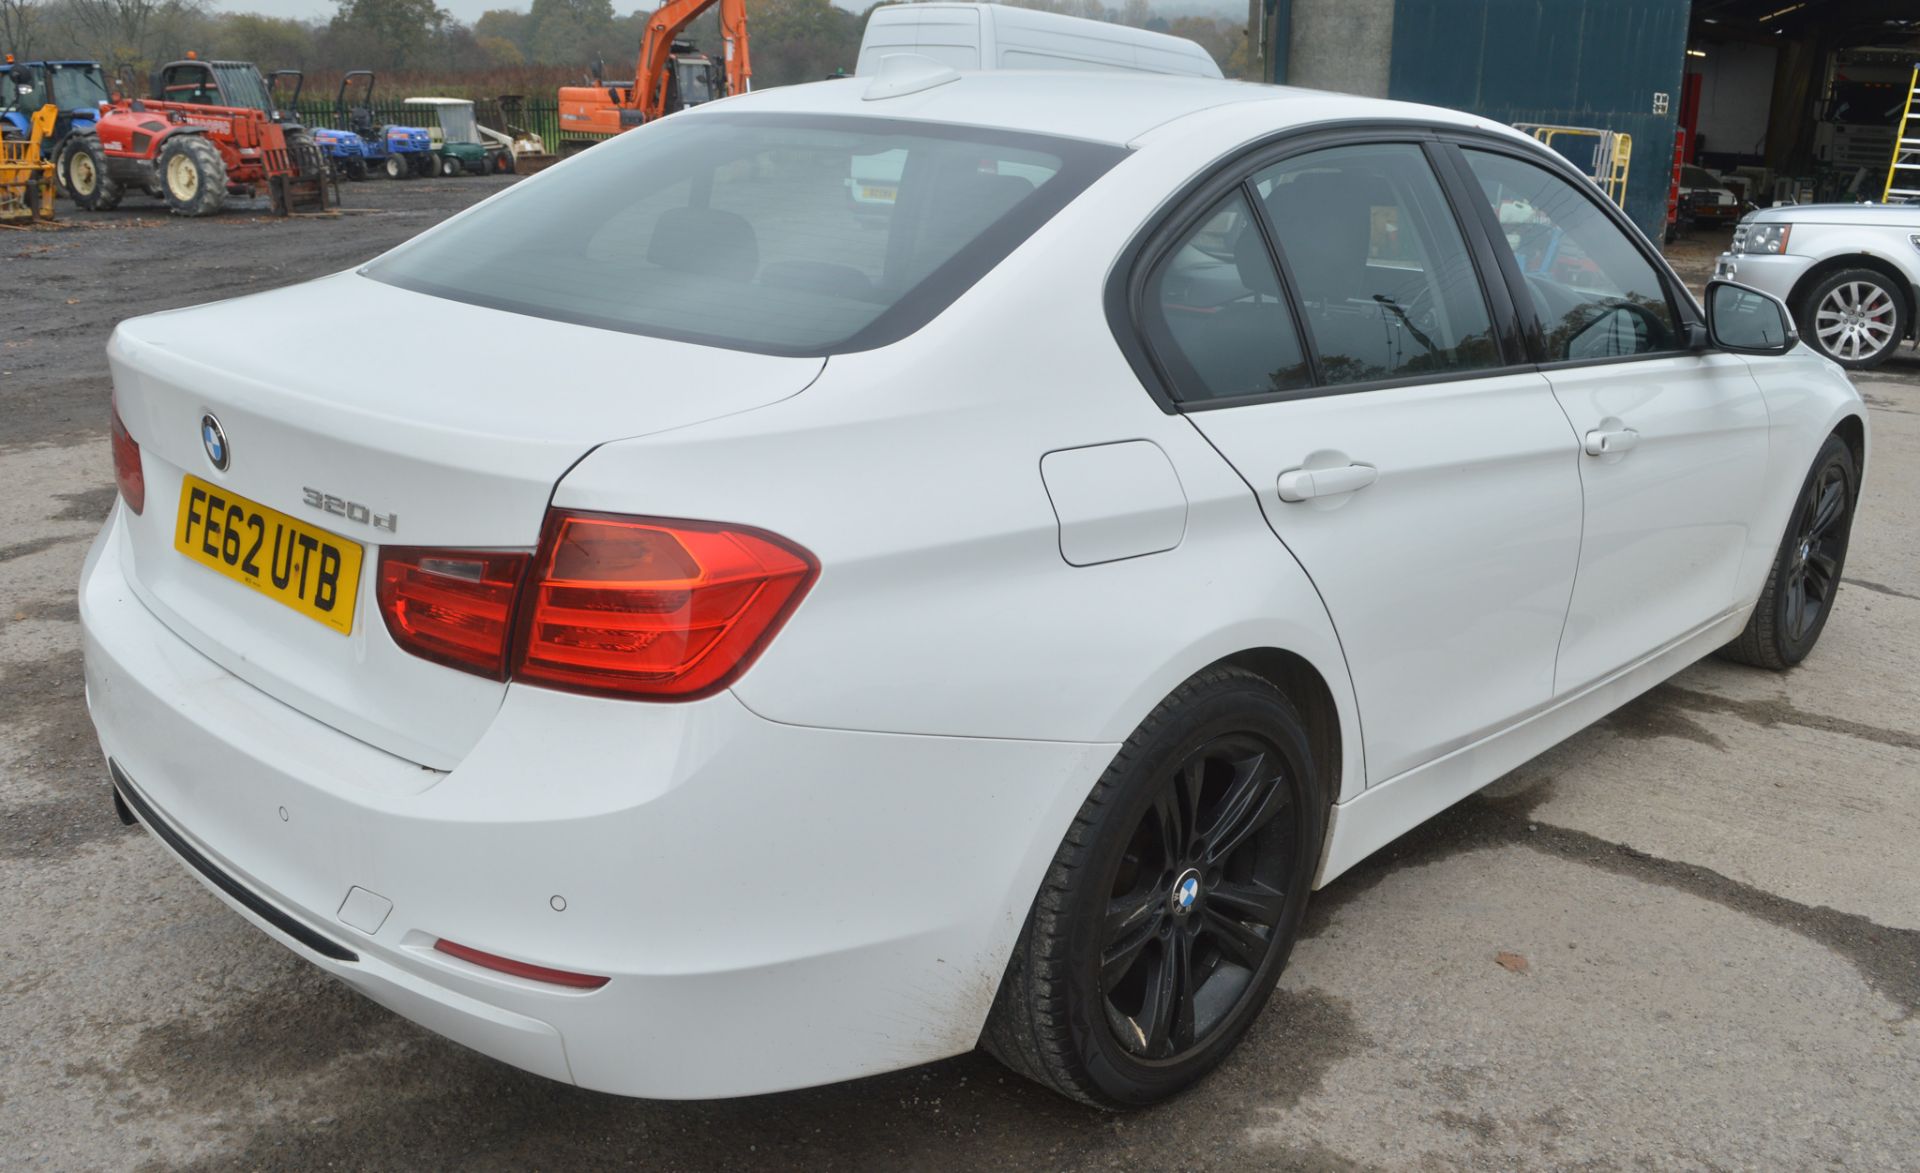 BMW 3 Series 2.0 320d Sport 4dr automatic saloon car  Registration Number: FE62 UTB Date of - Image 4 of 10